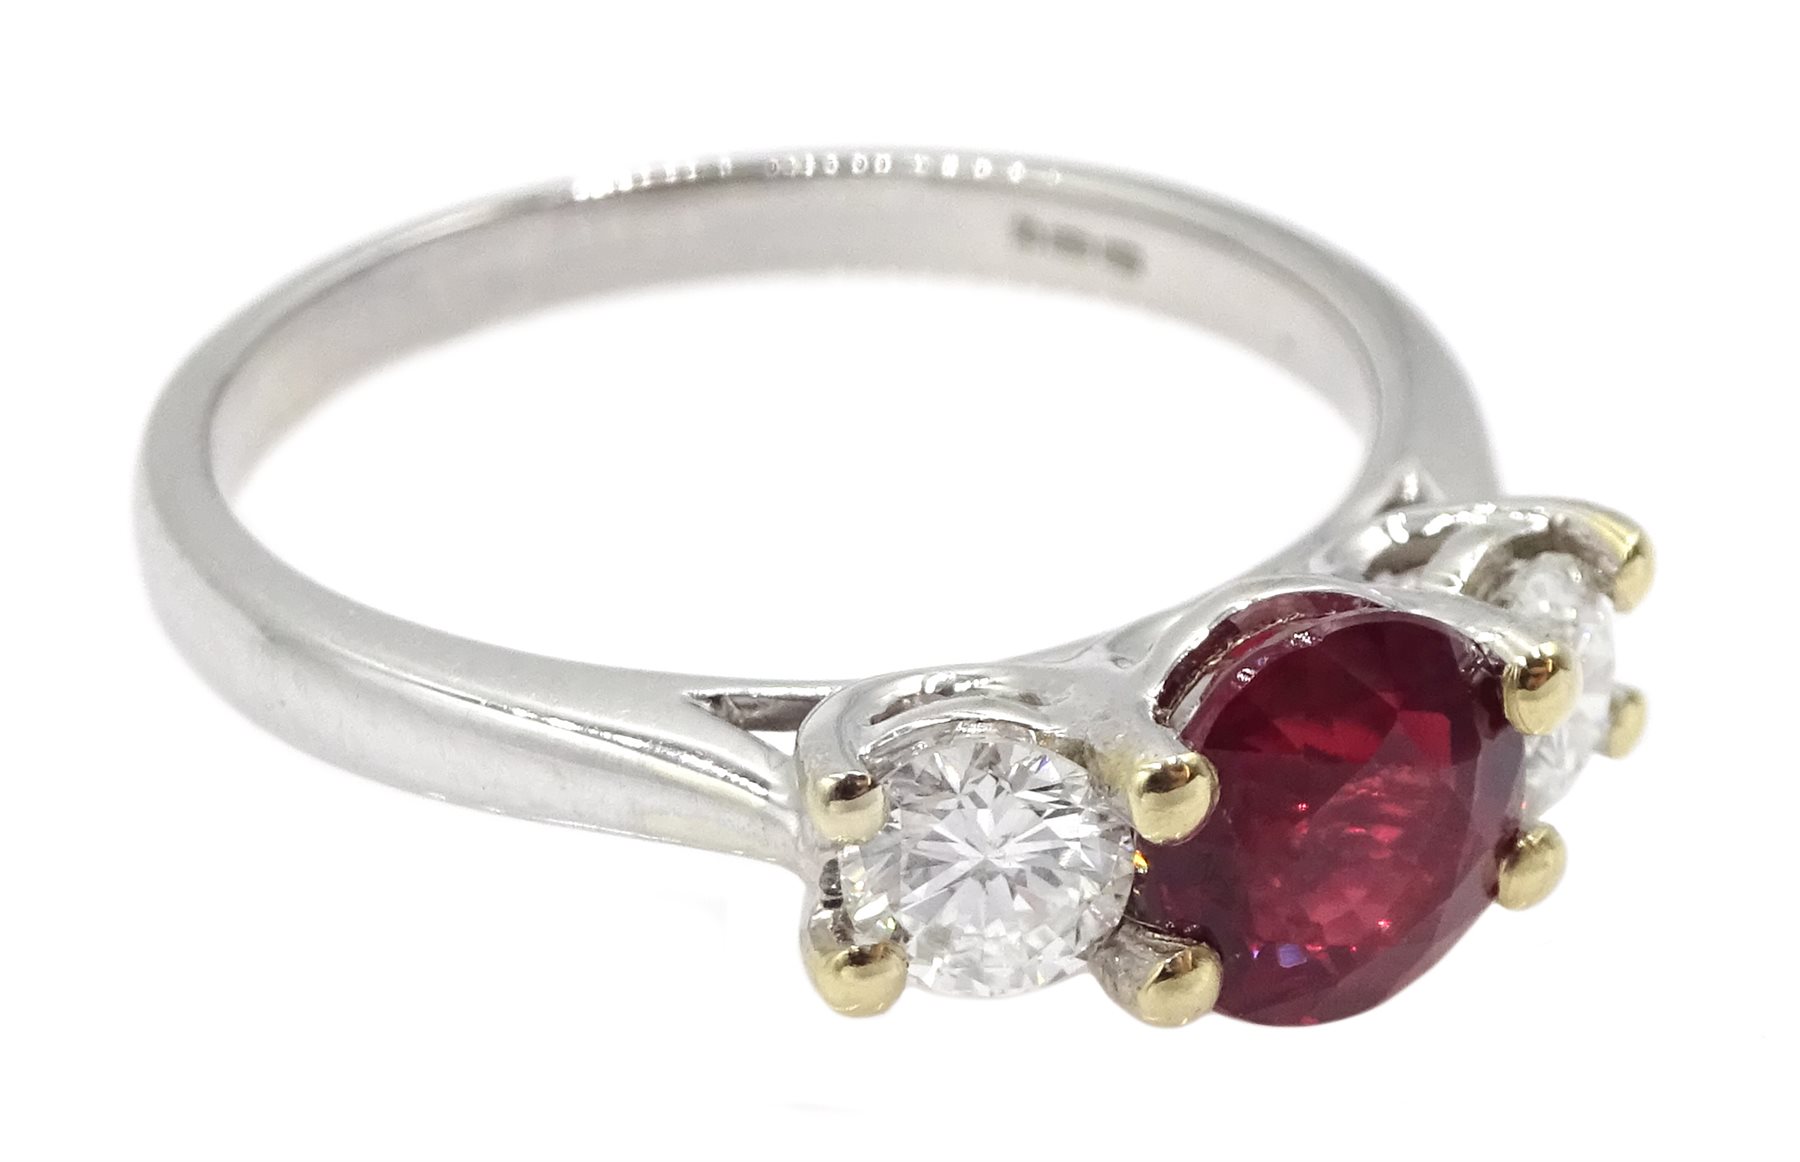 18ct white gold three stone ruby and diamond ring, hallmarked, ruby approx 0.95 carat - Image 3 of 5